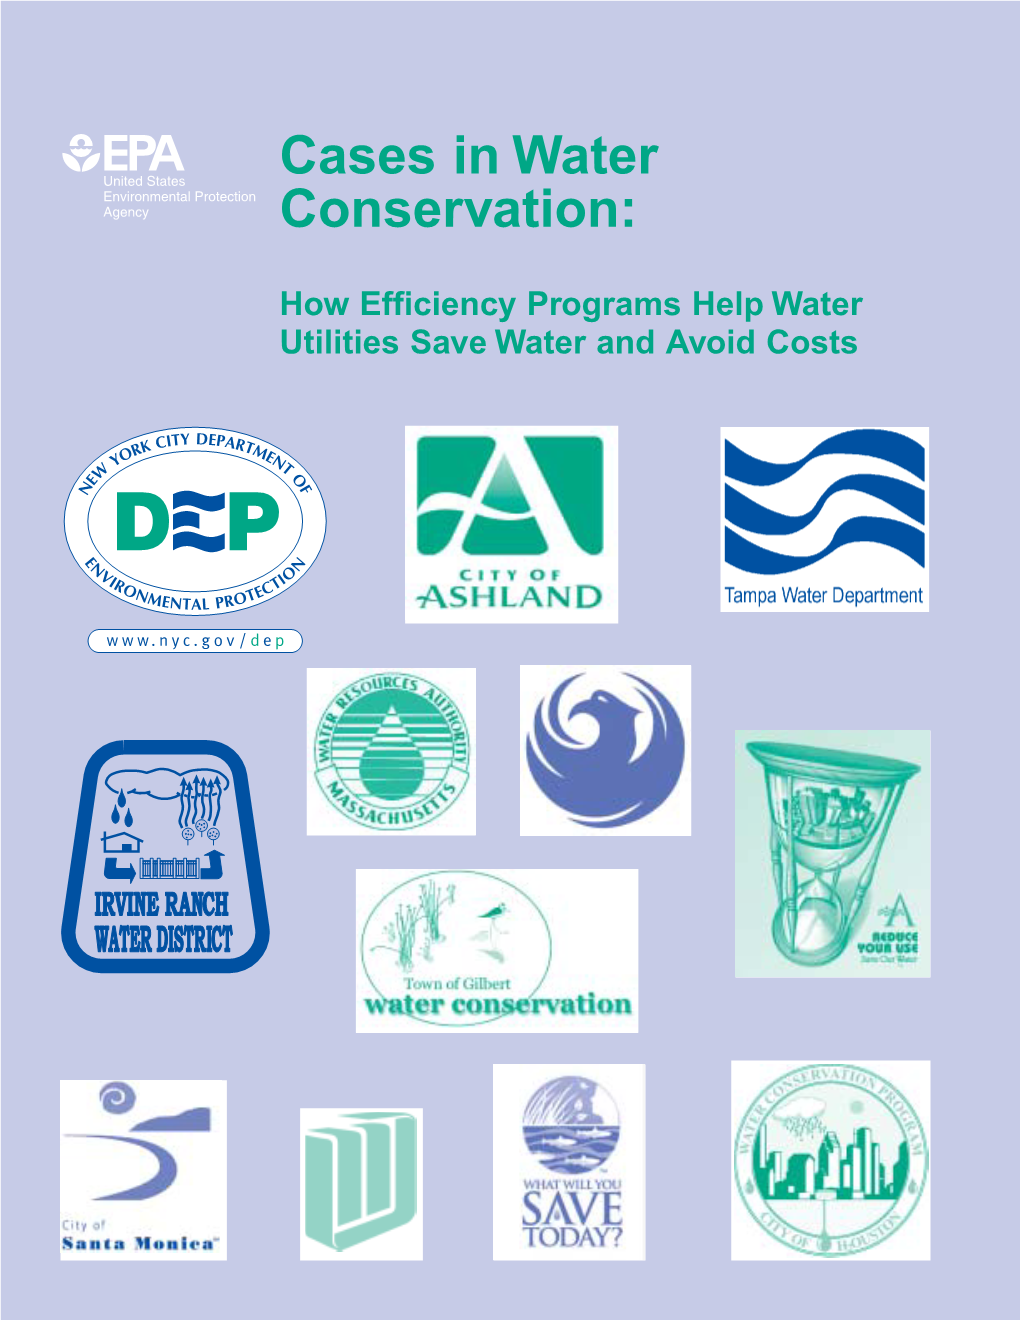 Cases in Water Conservation